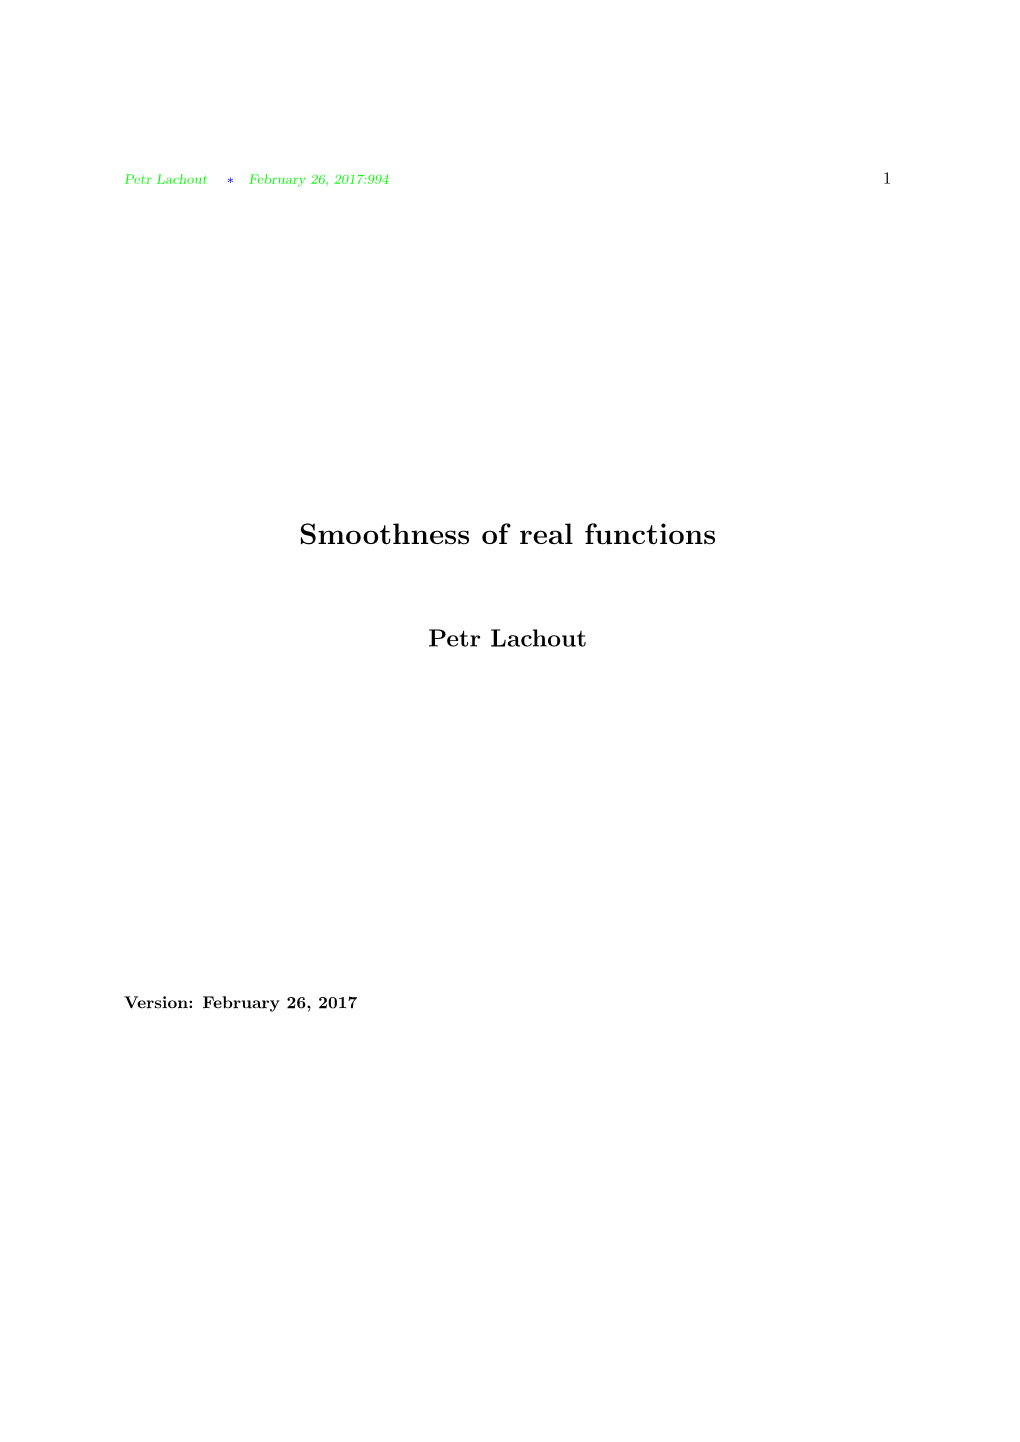 Smoothness of Real Functions